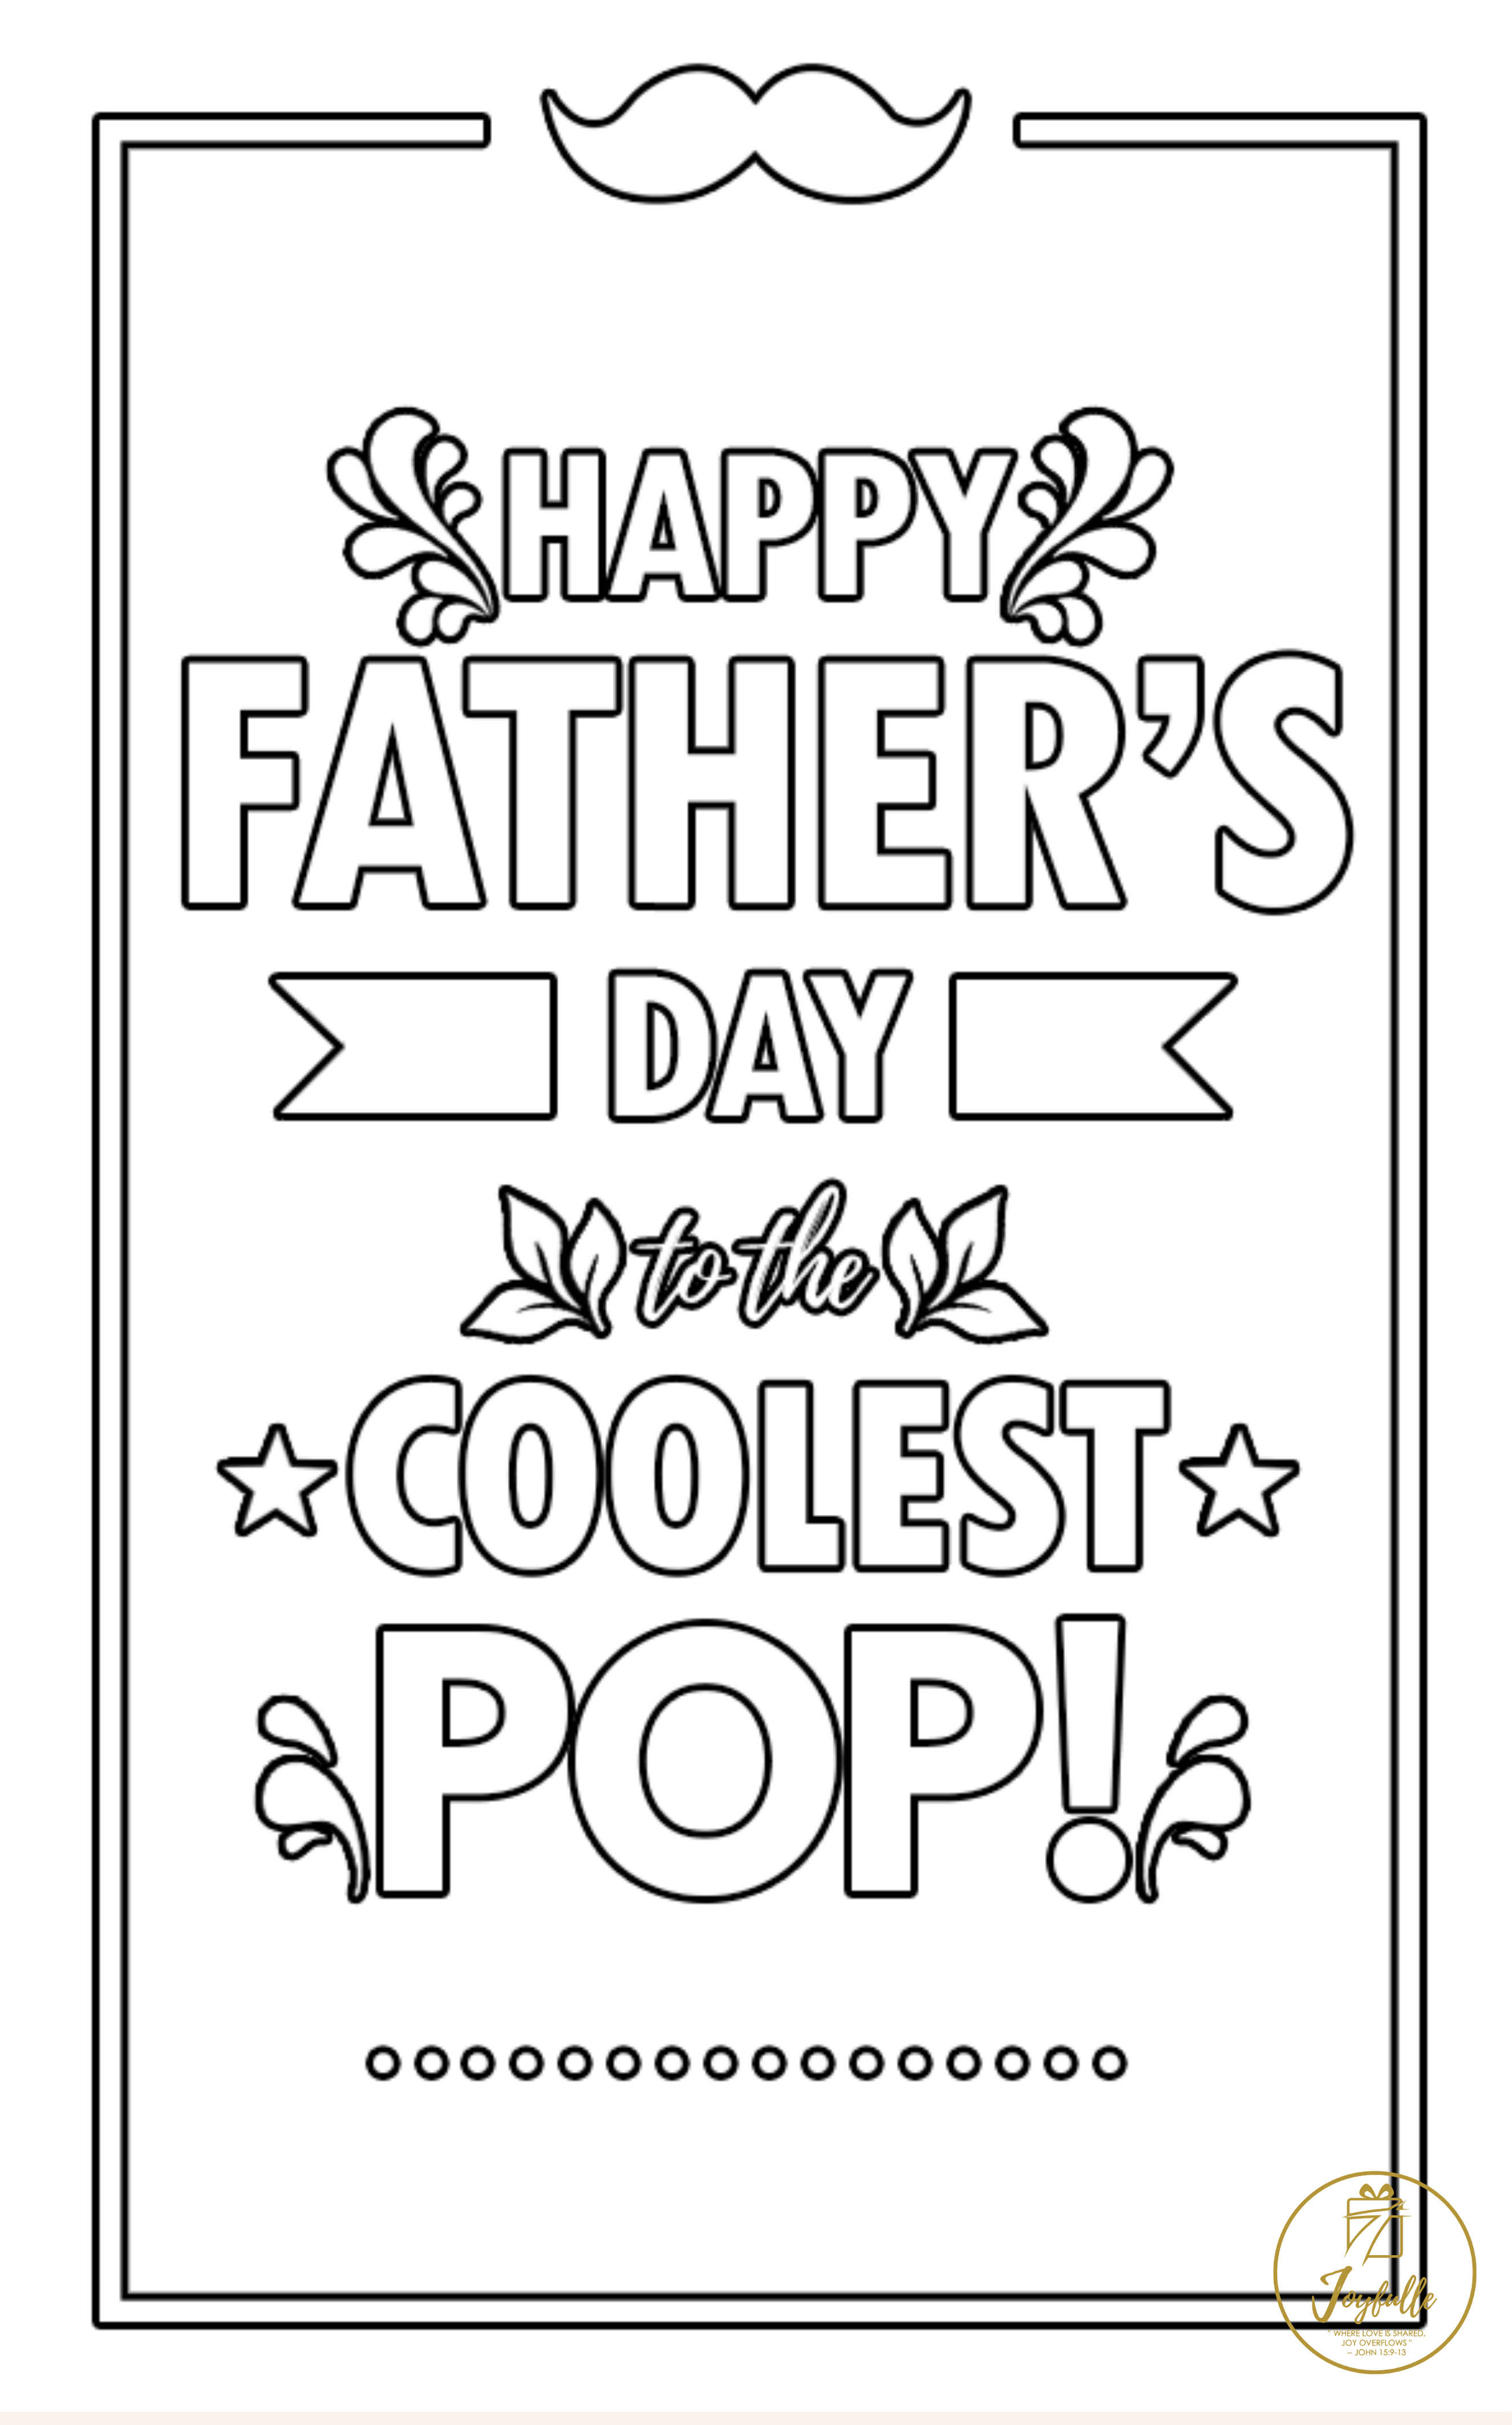 Father's Day Greeting Card 16